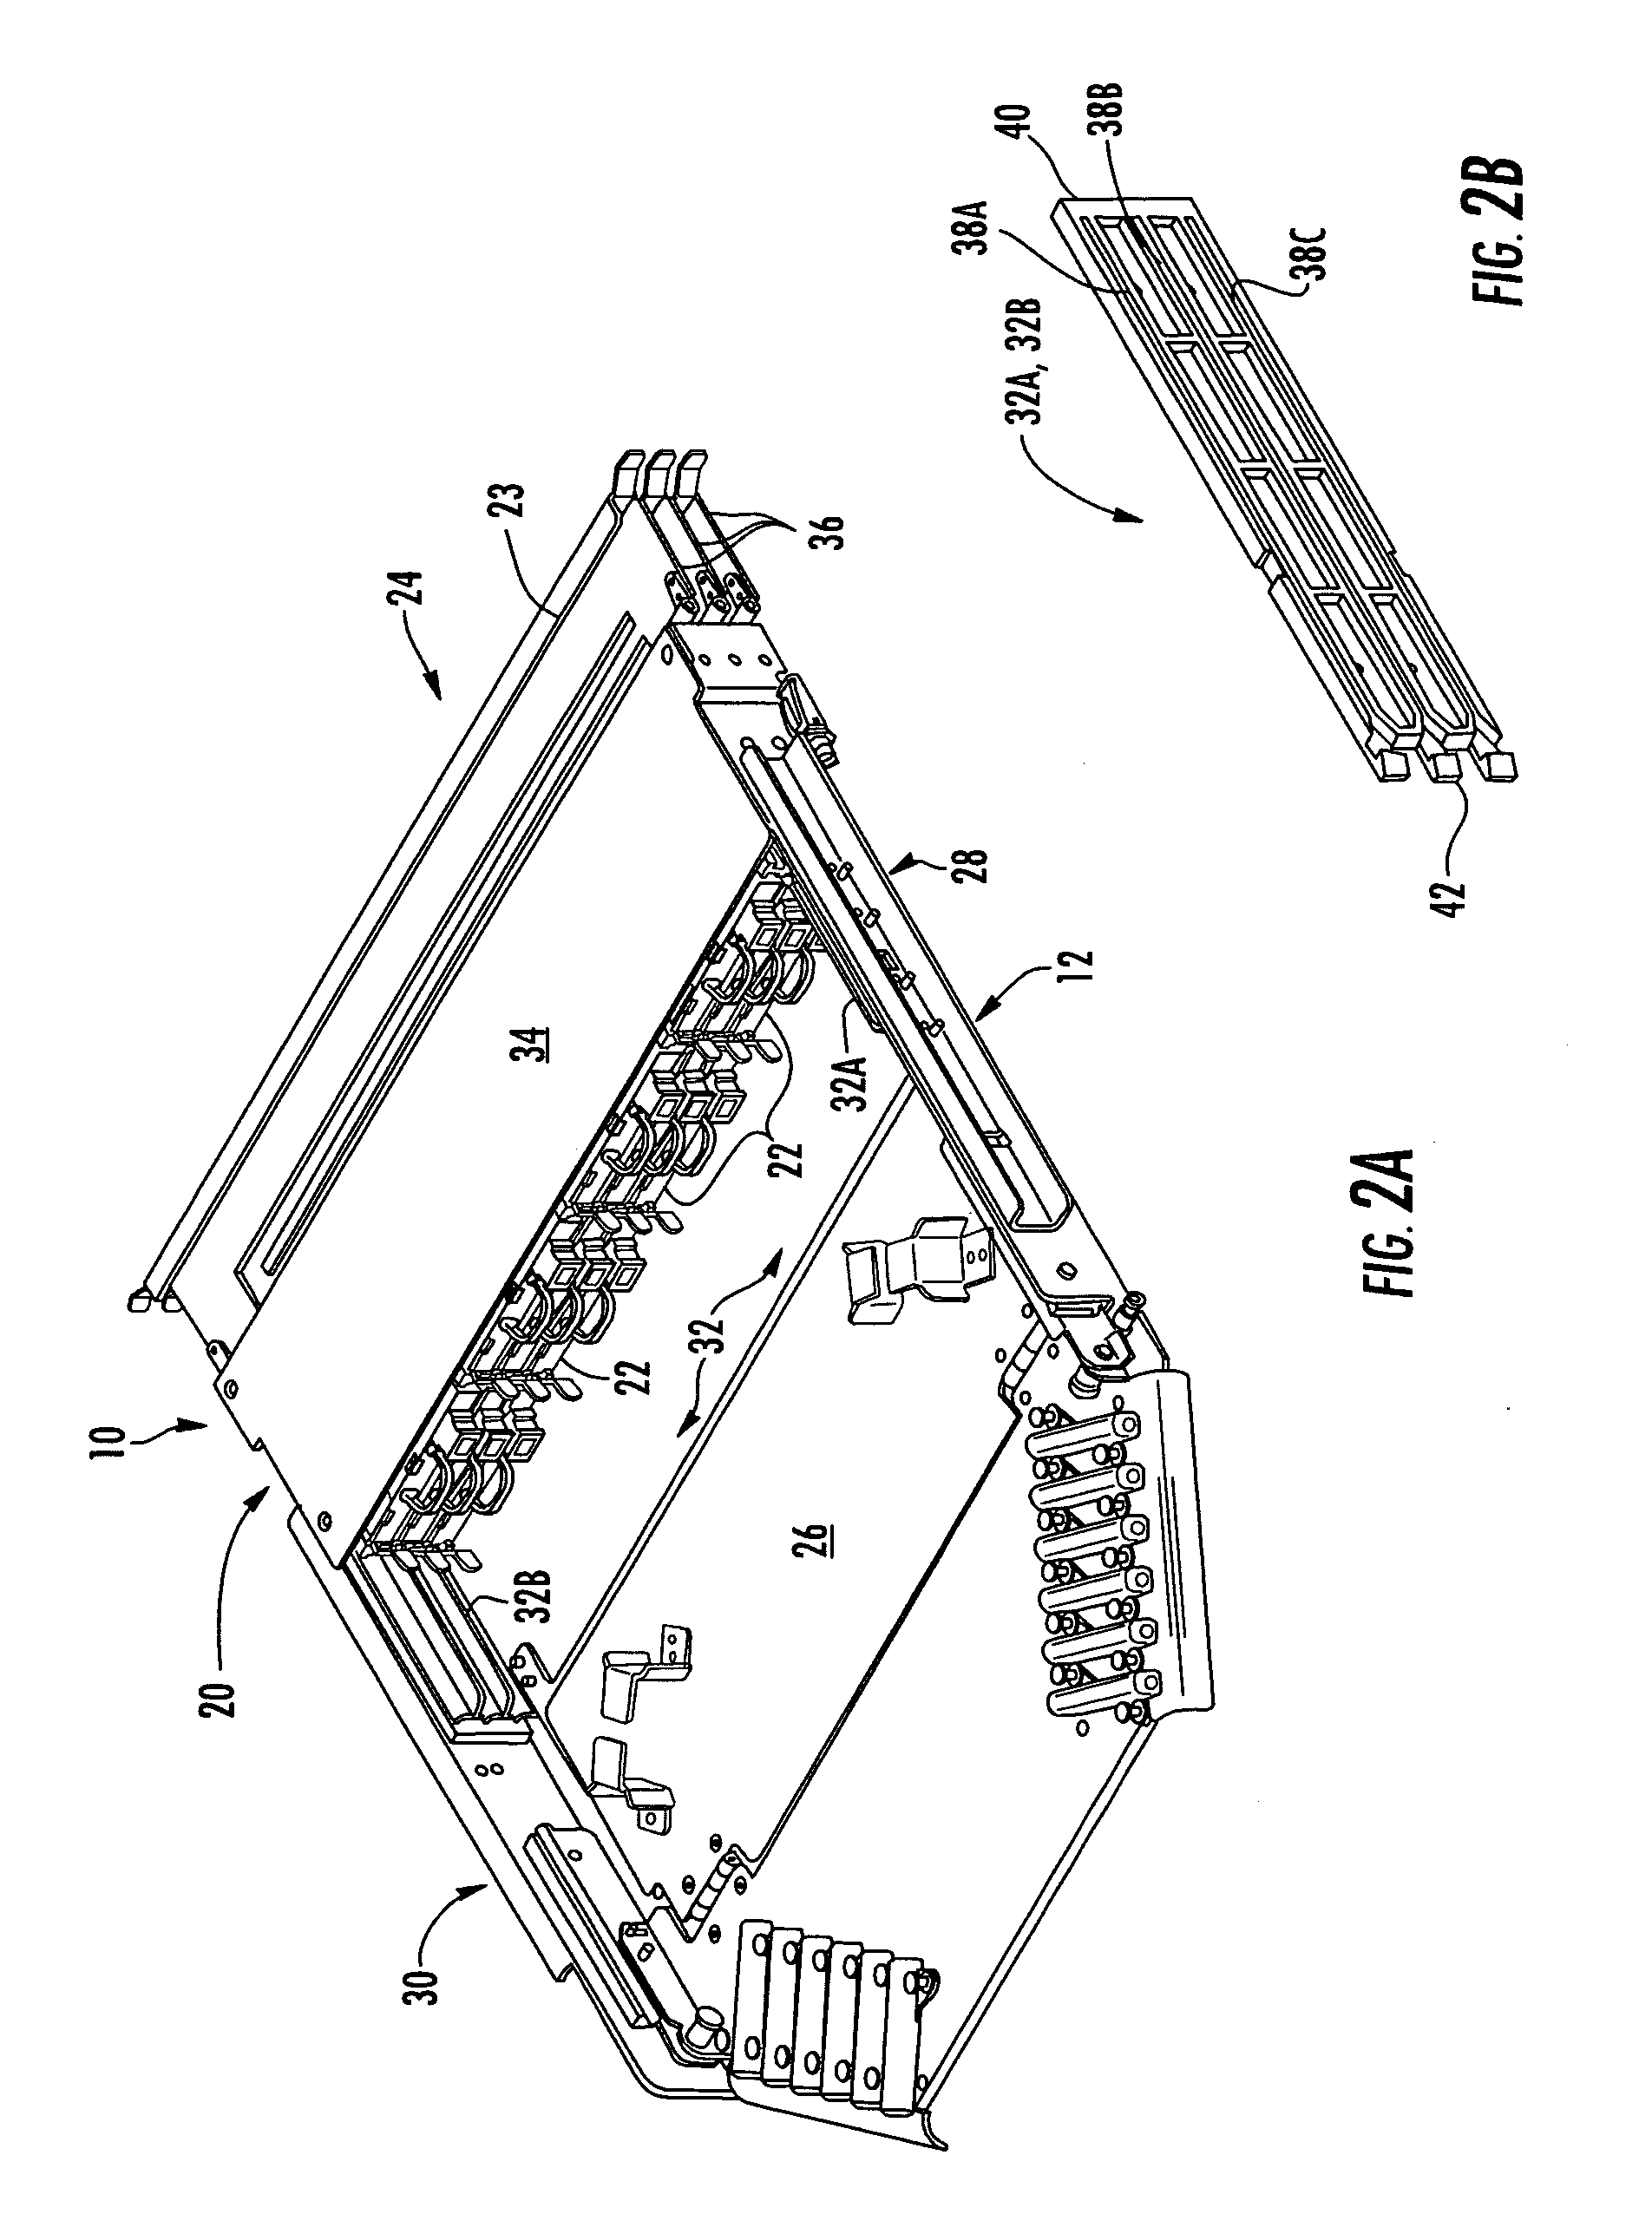 Rear-slidable extension in a fiber optic equipment tray